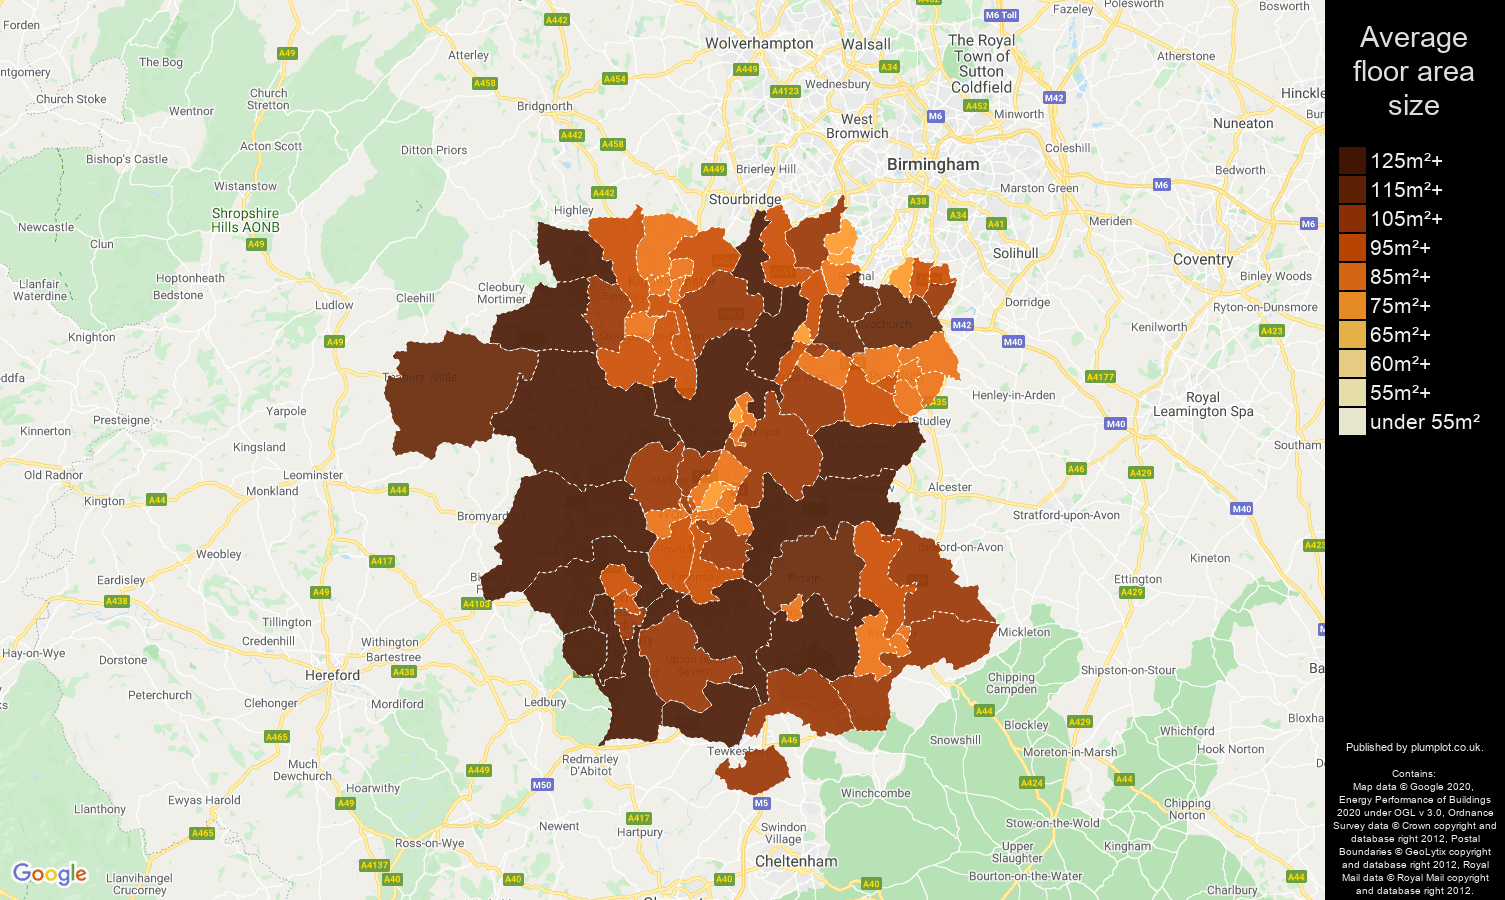 Worcestershire map of average floor area size of houses